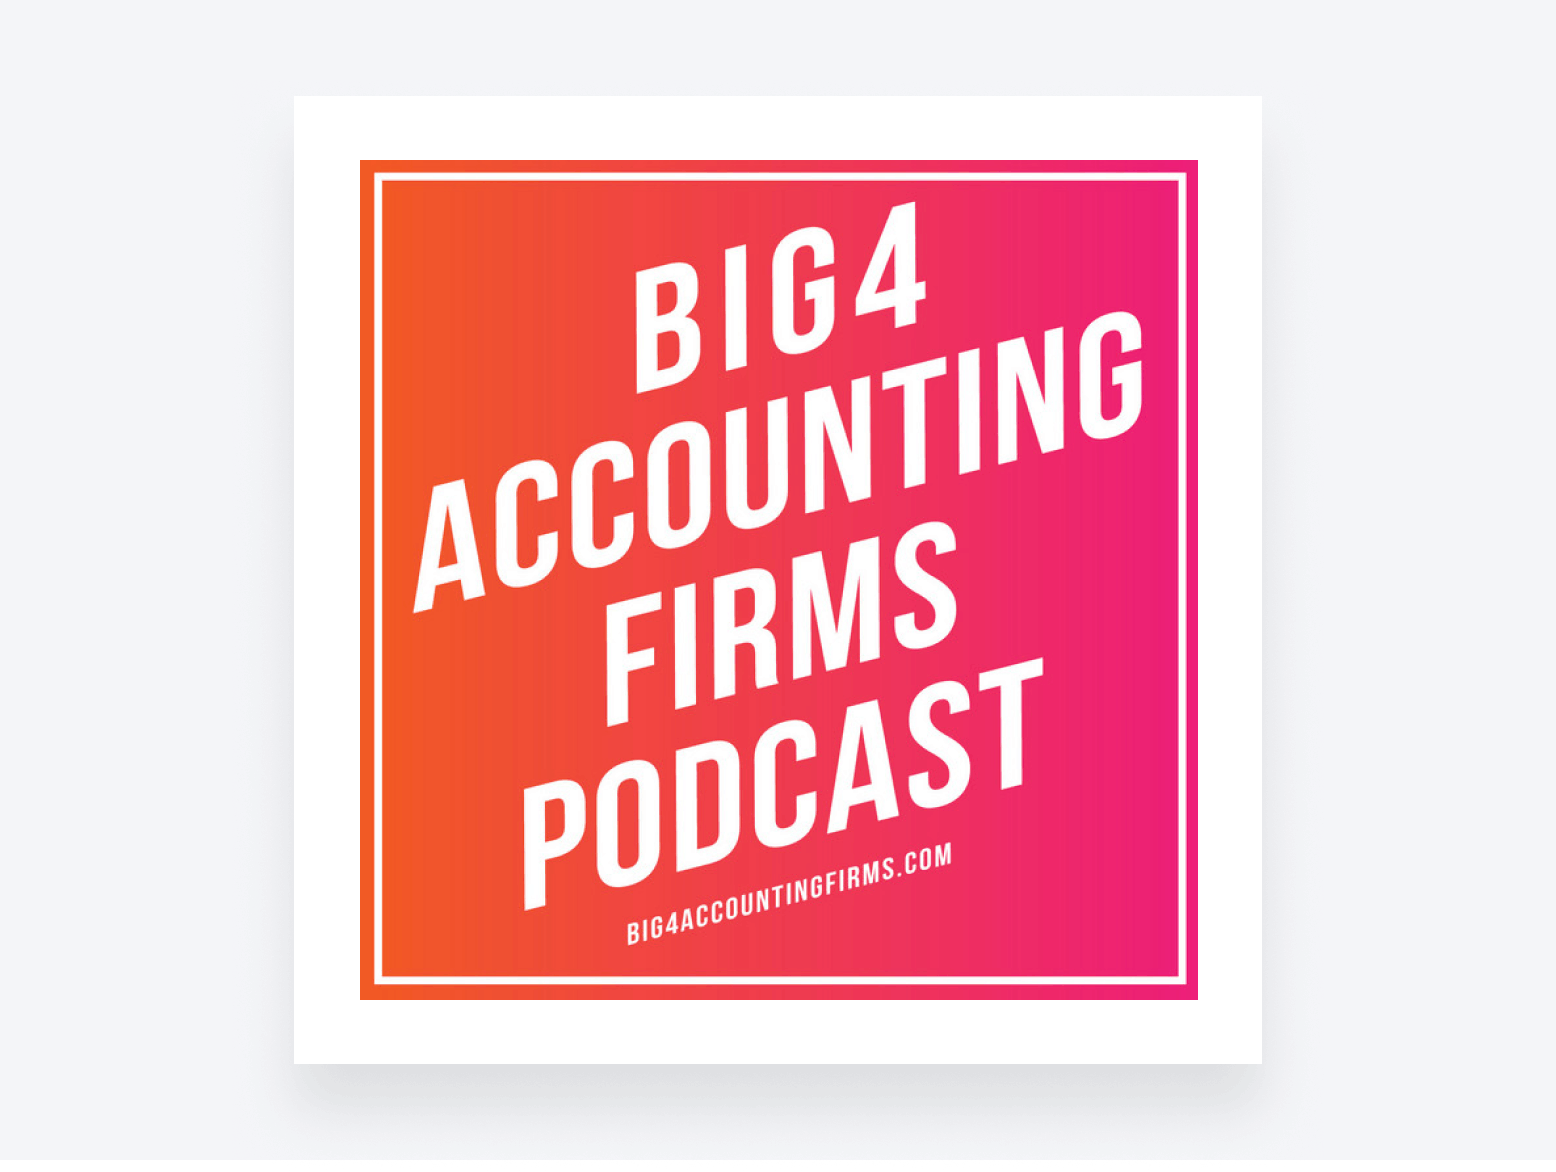 The Big 4 Accounting Firms podcast